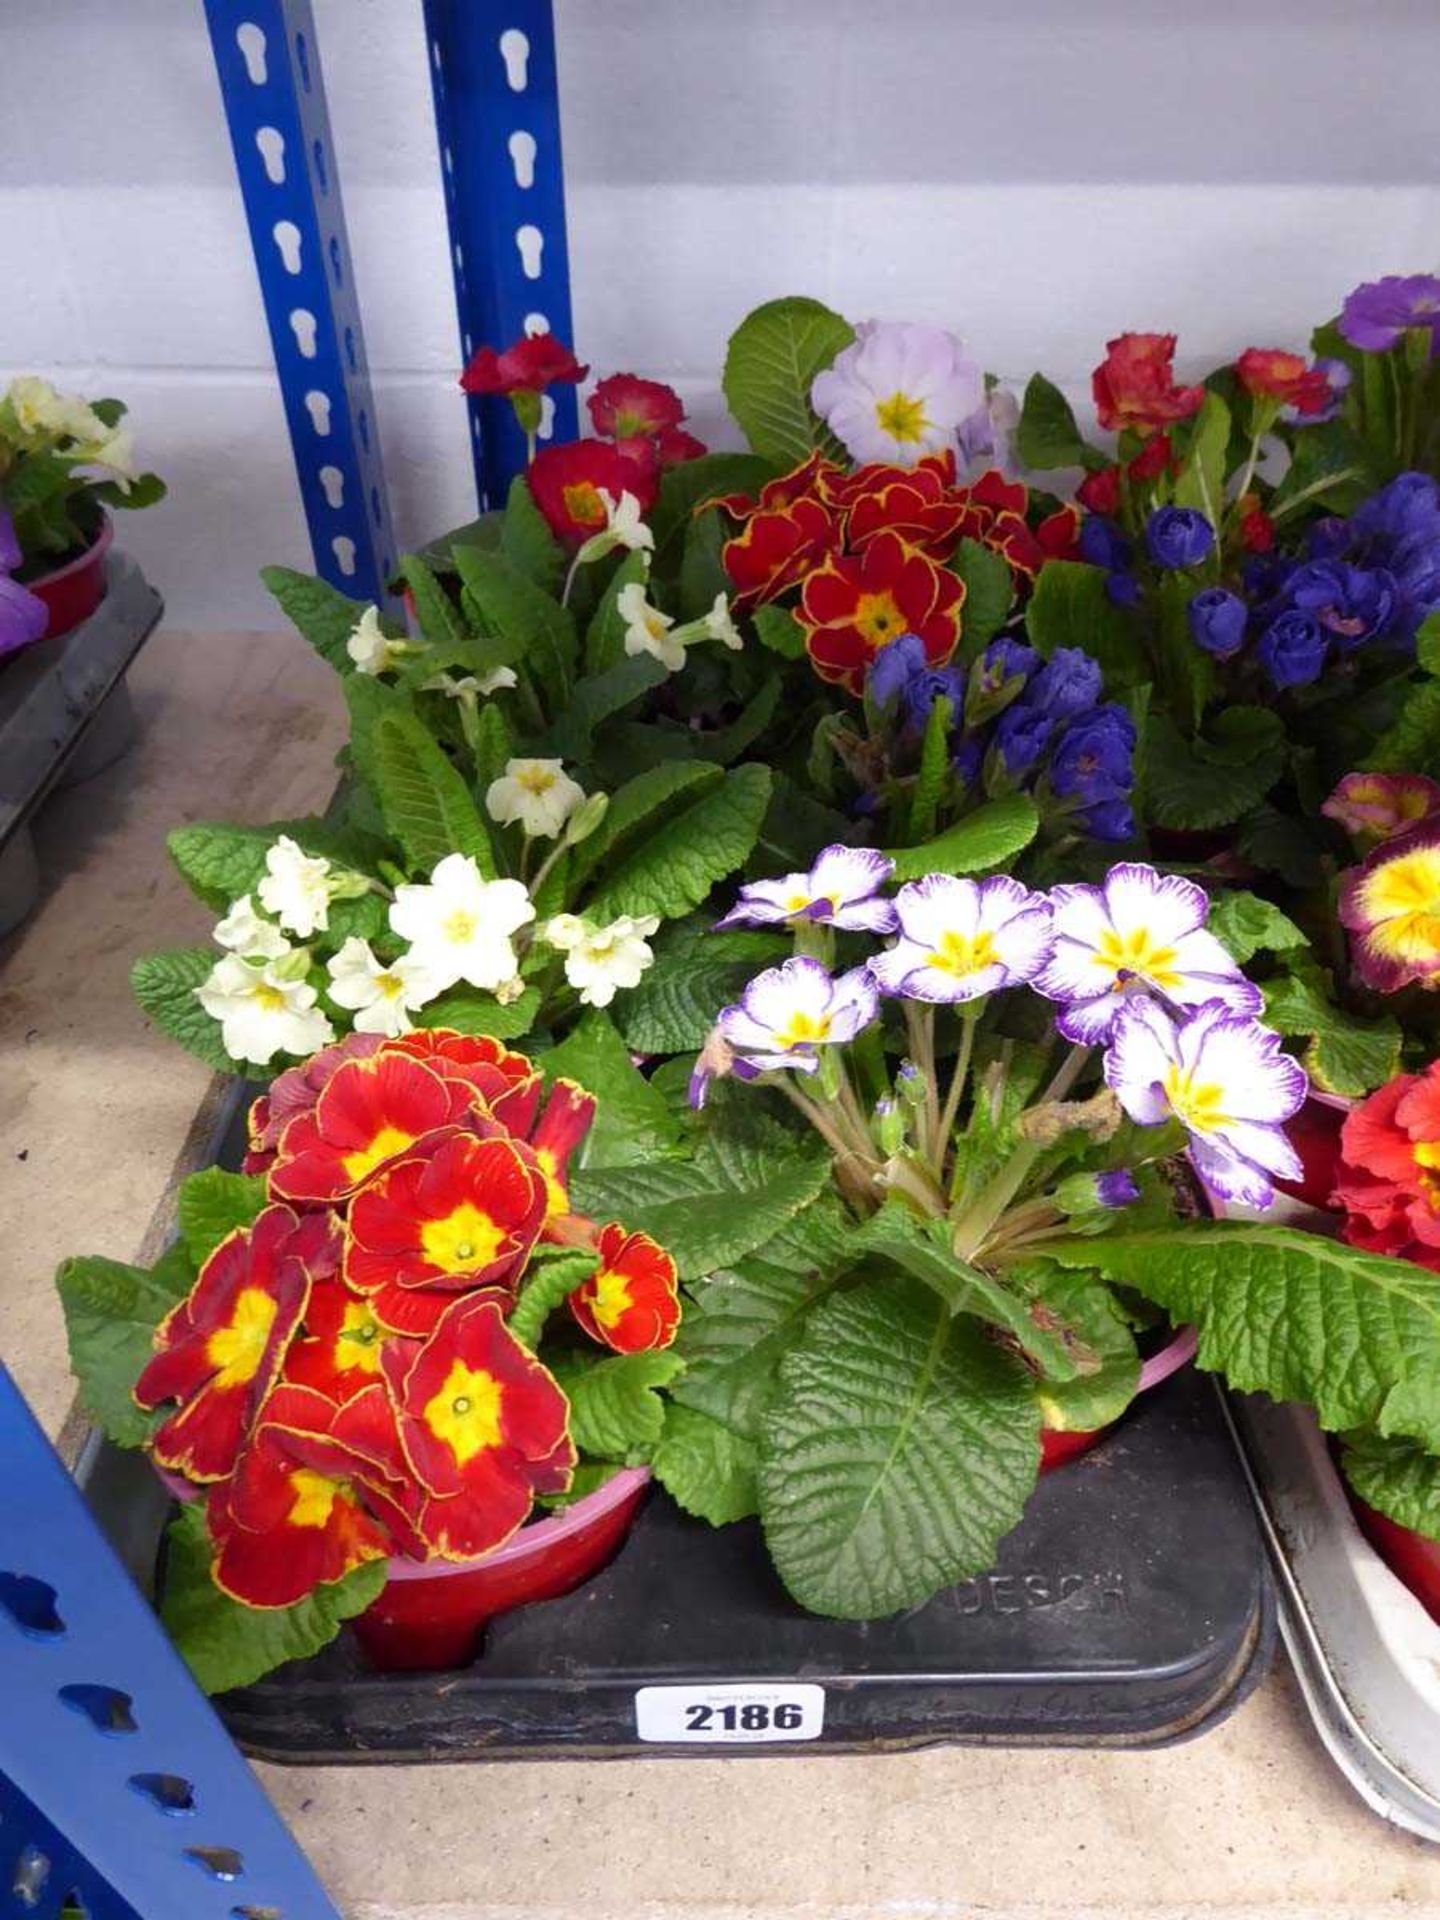 Tray containing 8 potted primulas